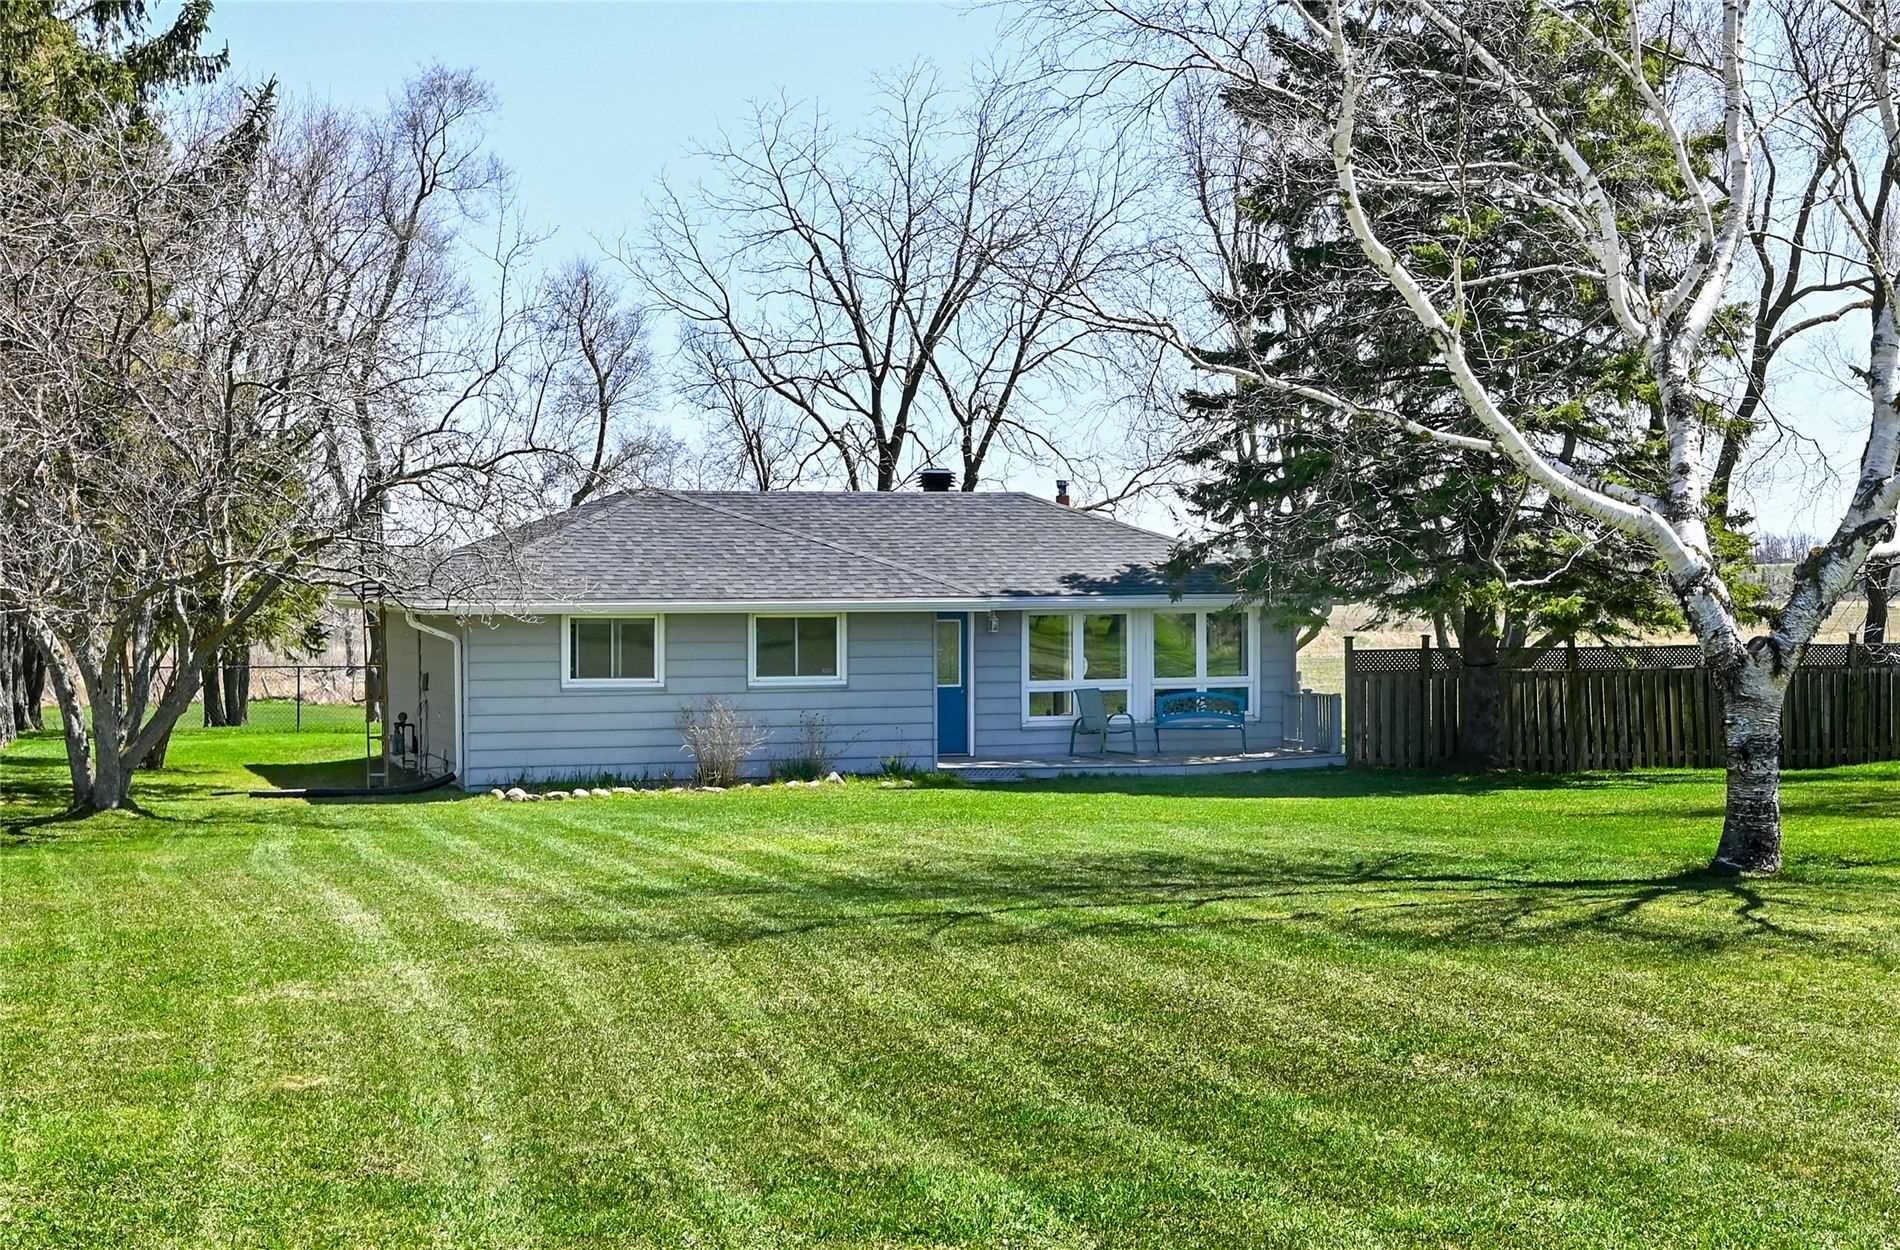 Main Photo: 516483 County Rd 124 in Melancthon: Rural Melancthon House (Bungalow) for sale : MLS®# X5612202